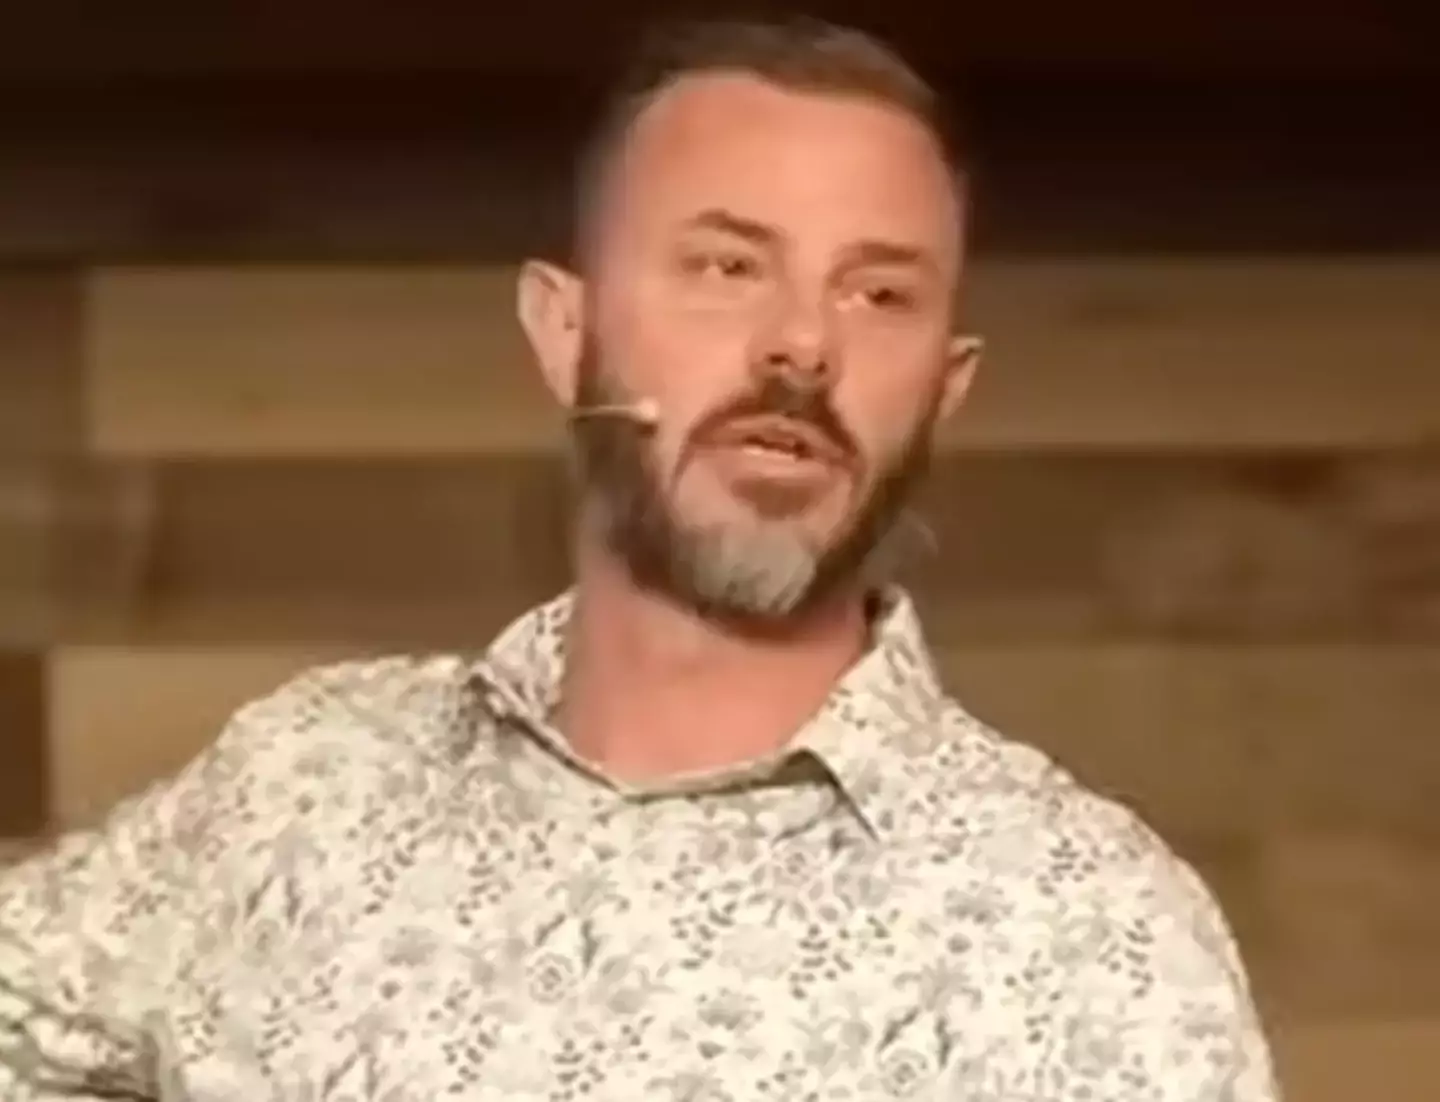 Pastor John-Paul Miller announced his wife's suicide at church. (FITSNews via YouTube)